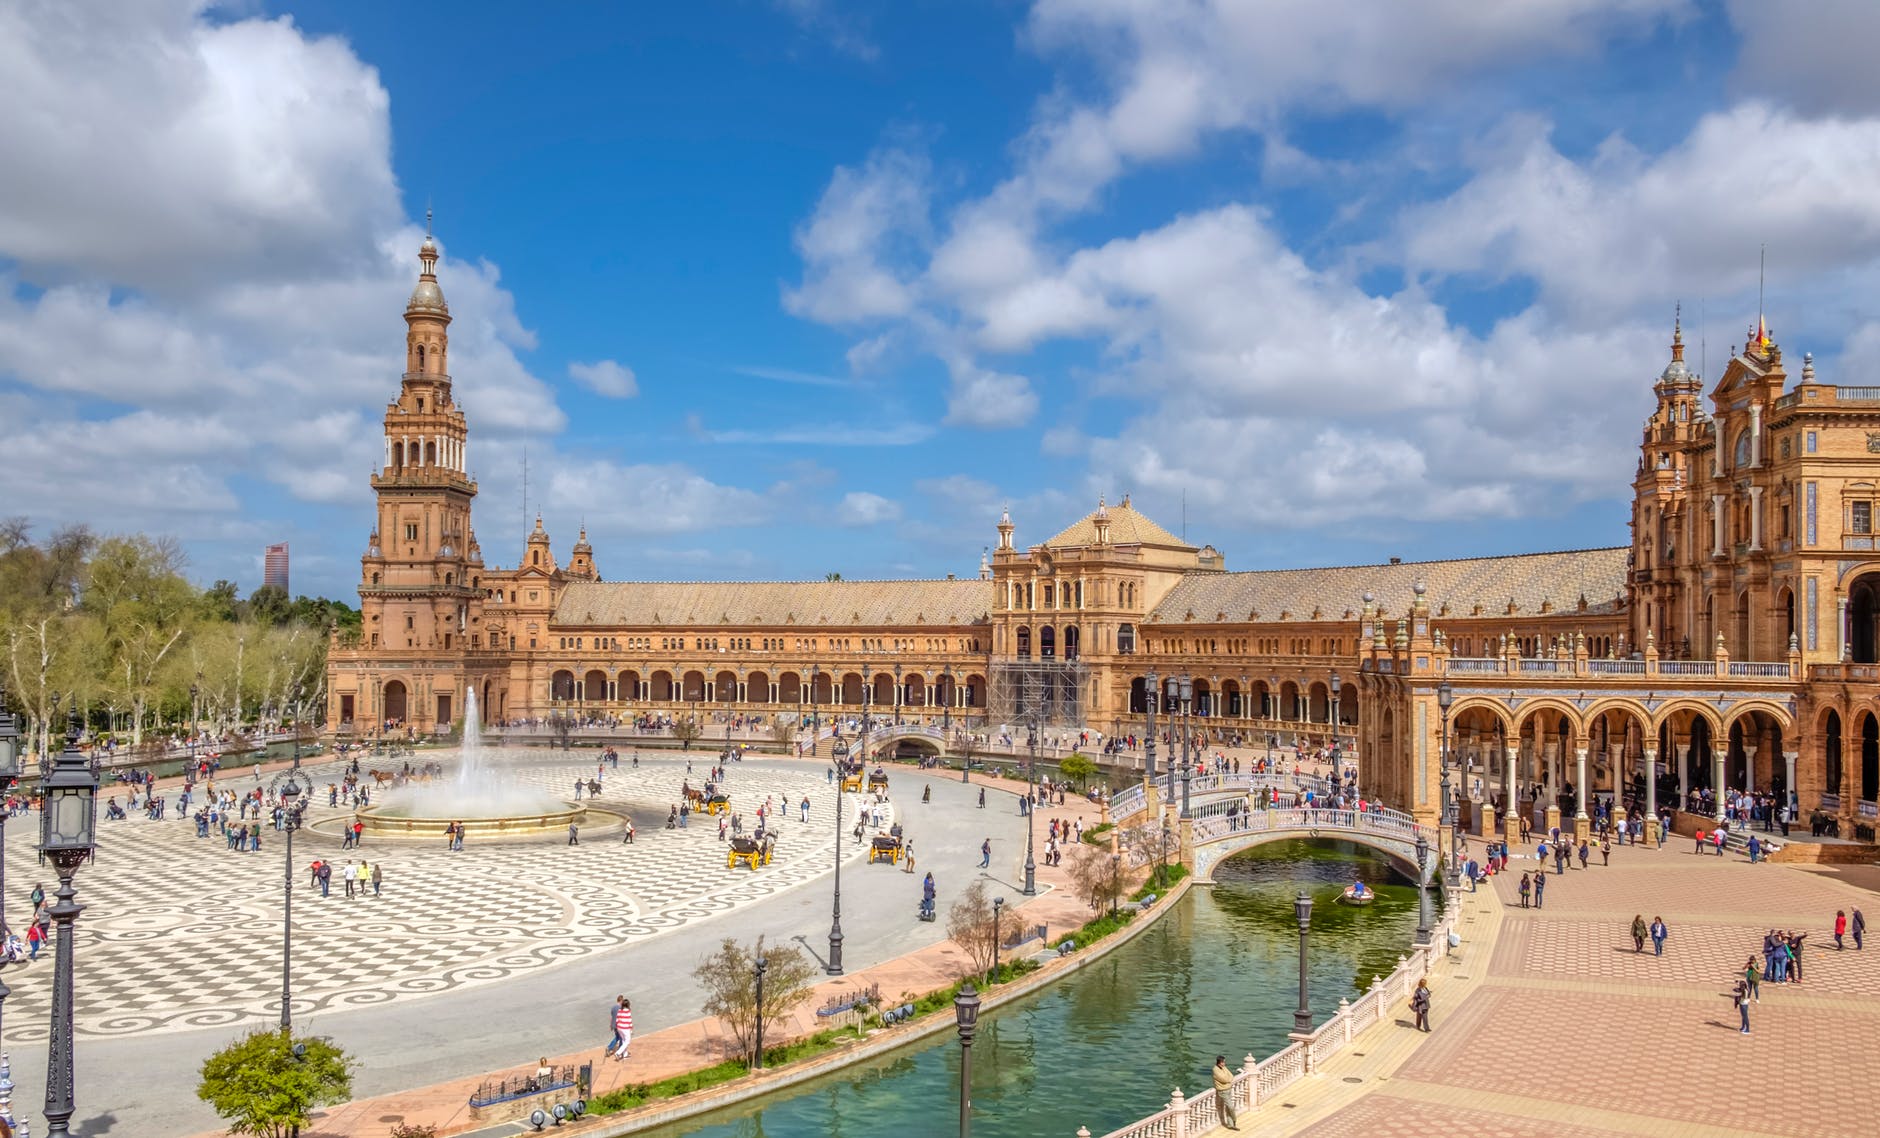 scenic view of spain square under blue sky with white clouds at daytime Best Places to visit in Spain in Summer 